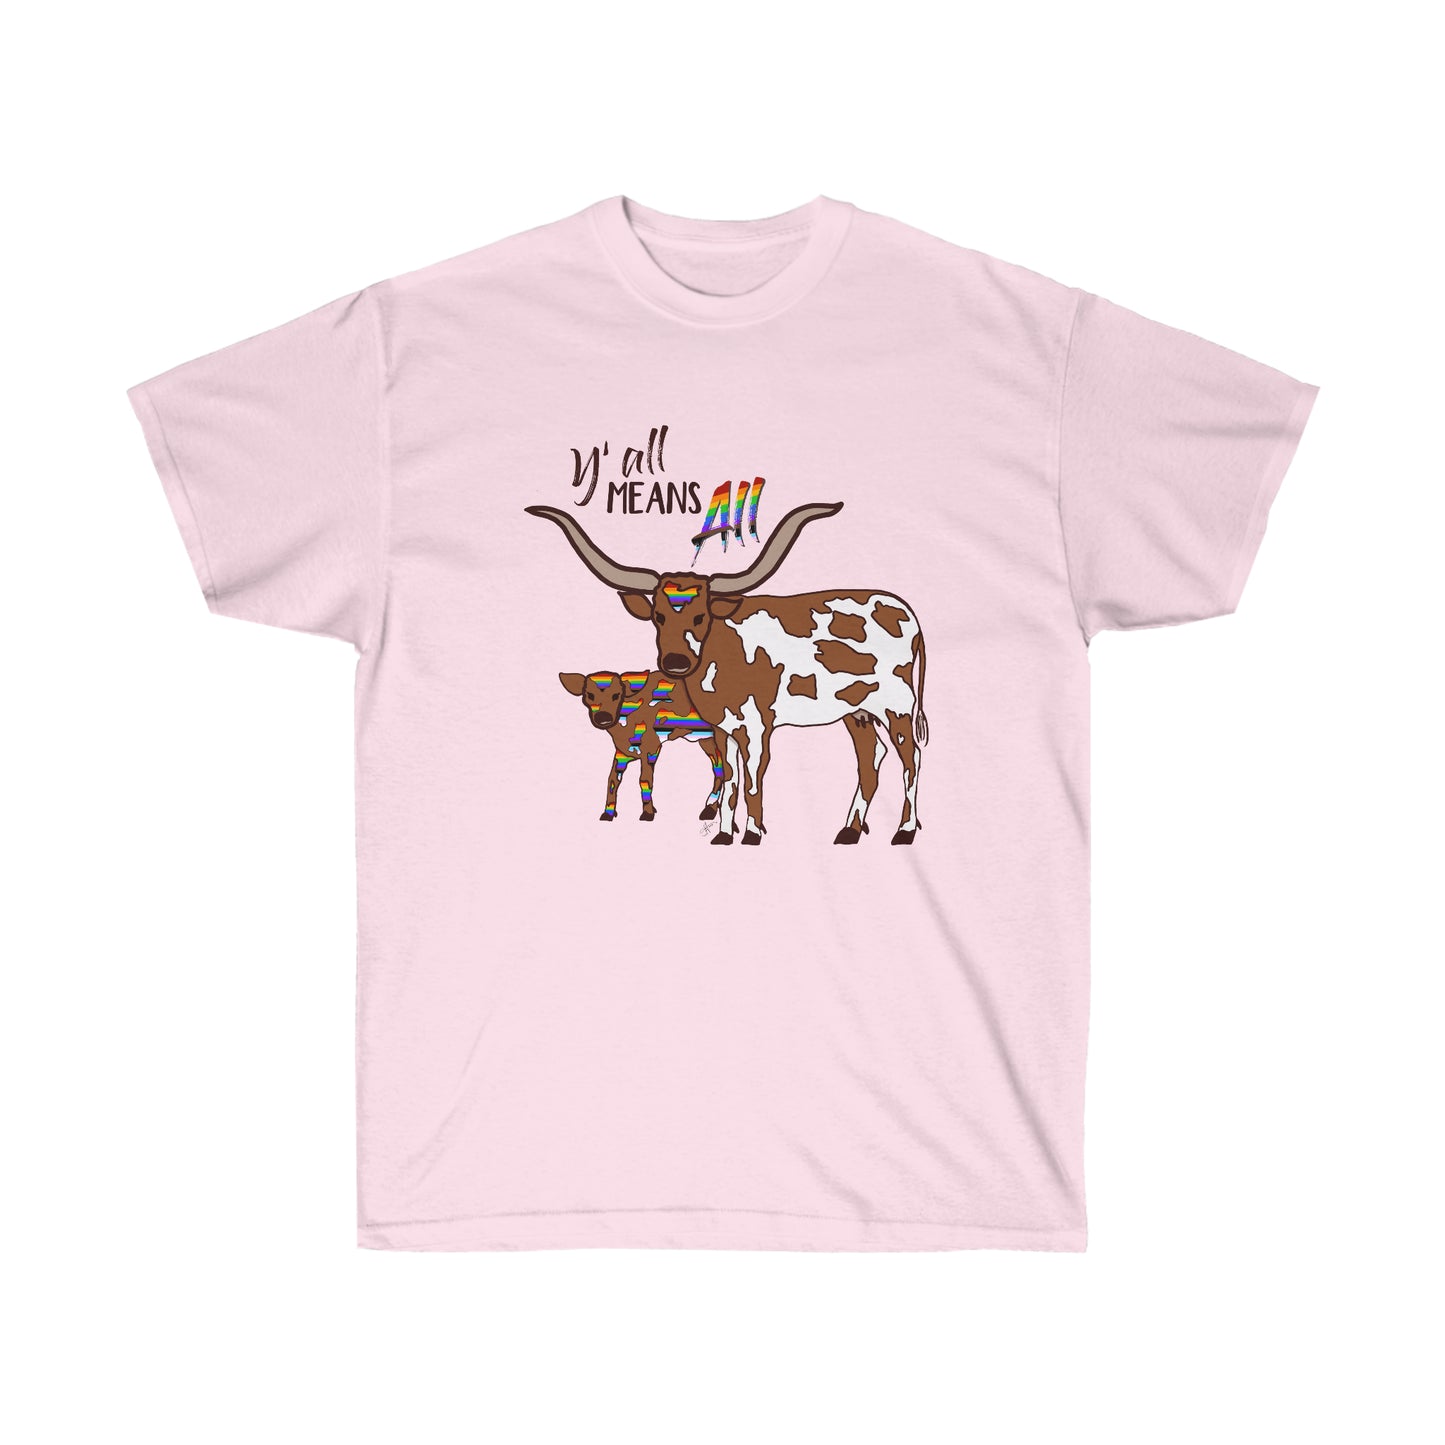 Y'all Means All - Unisex Ultra Cotton Tee